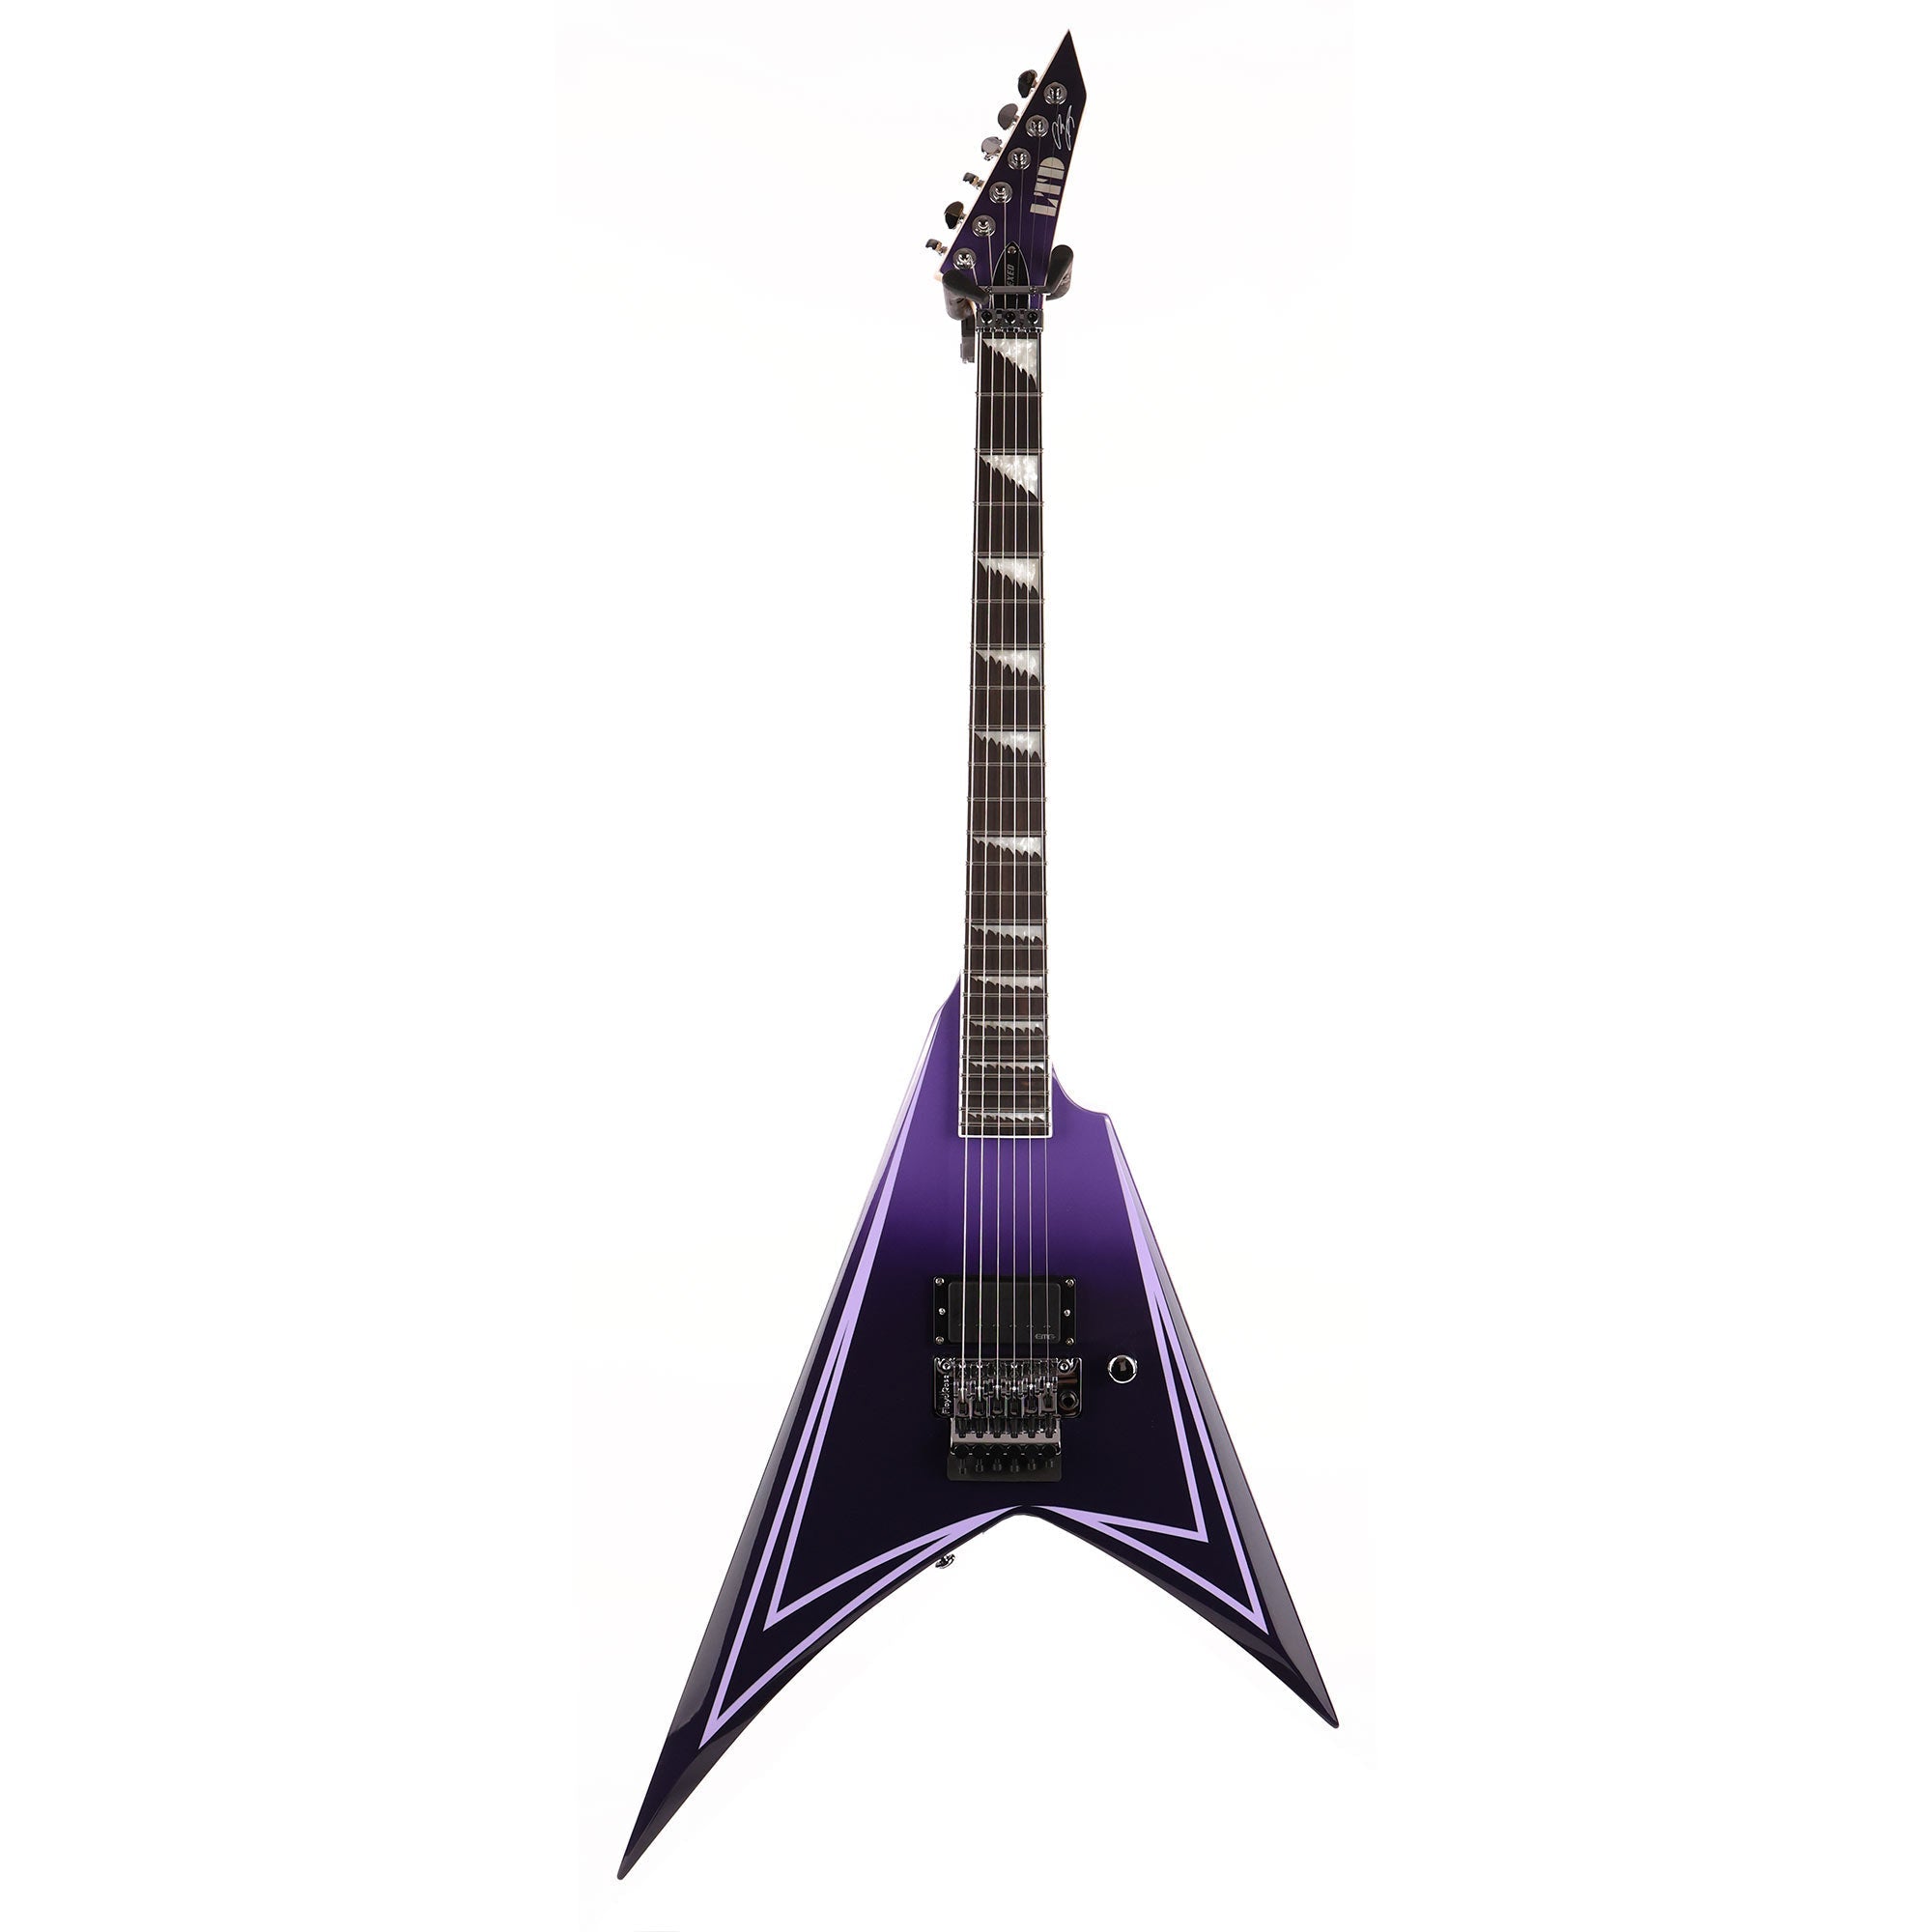 ESP LTD Alexi Laiho Hexed Signature Purple Fade Satin with Ripped Pinstripes Used